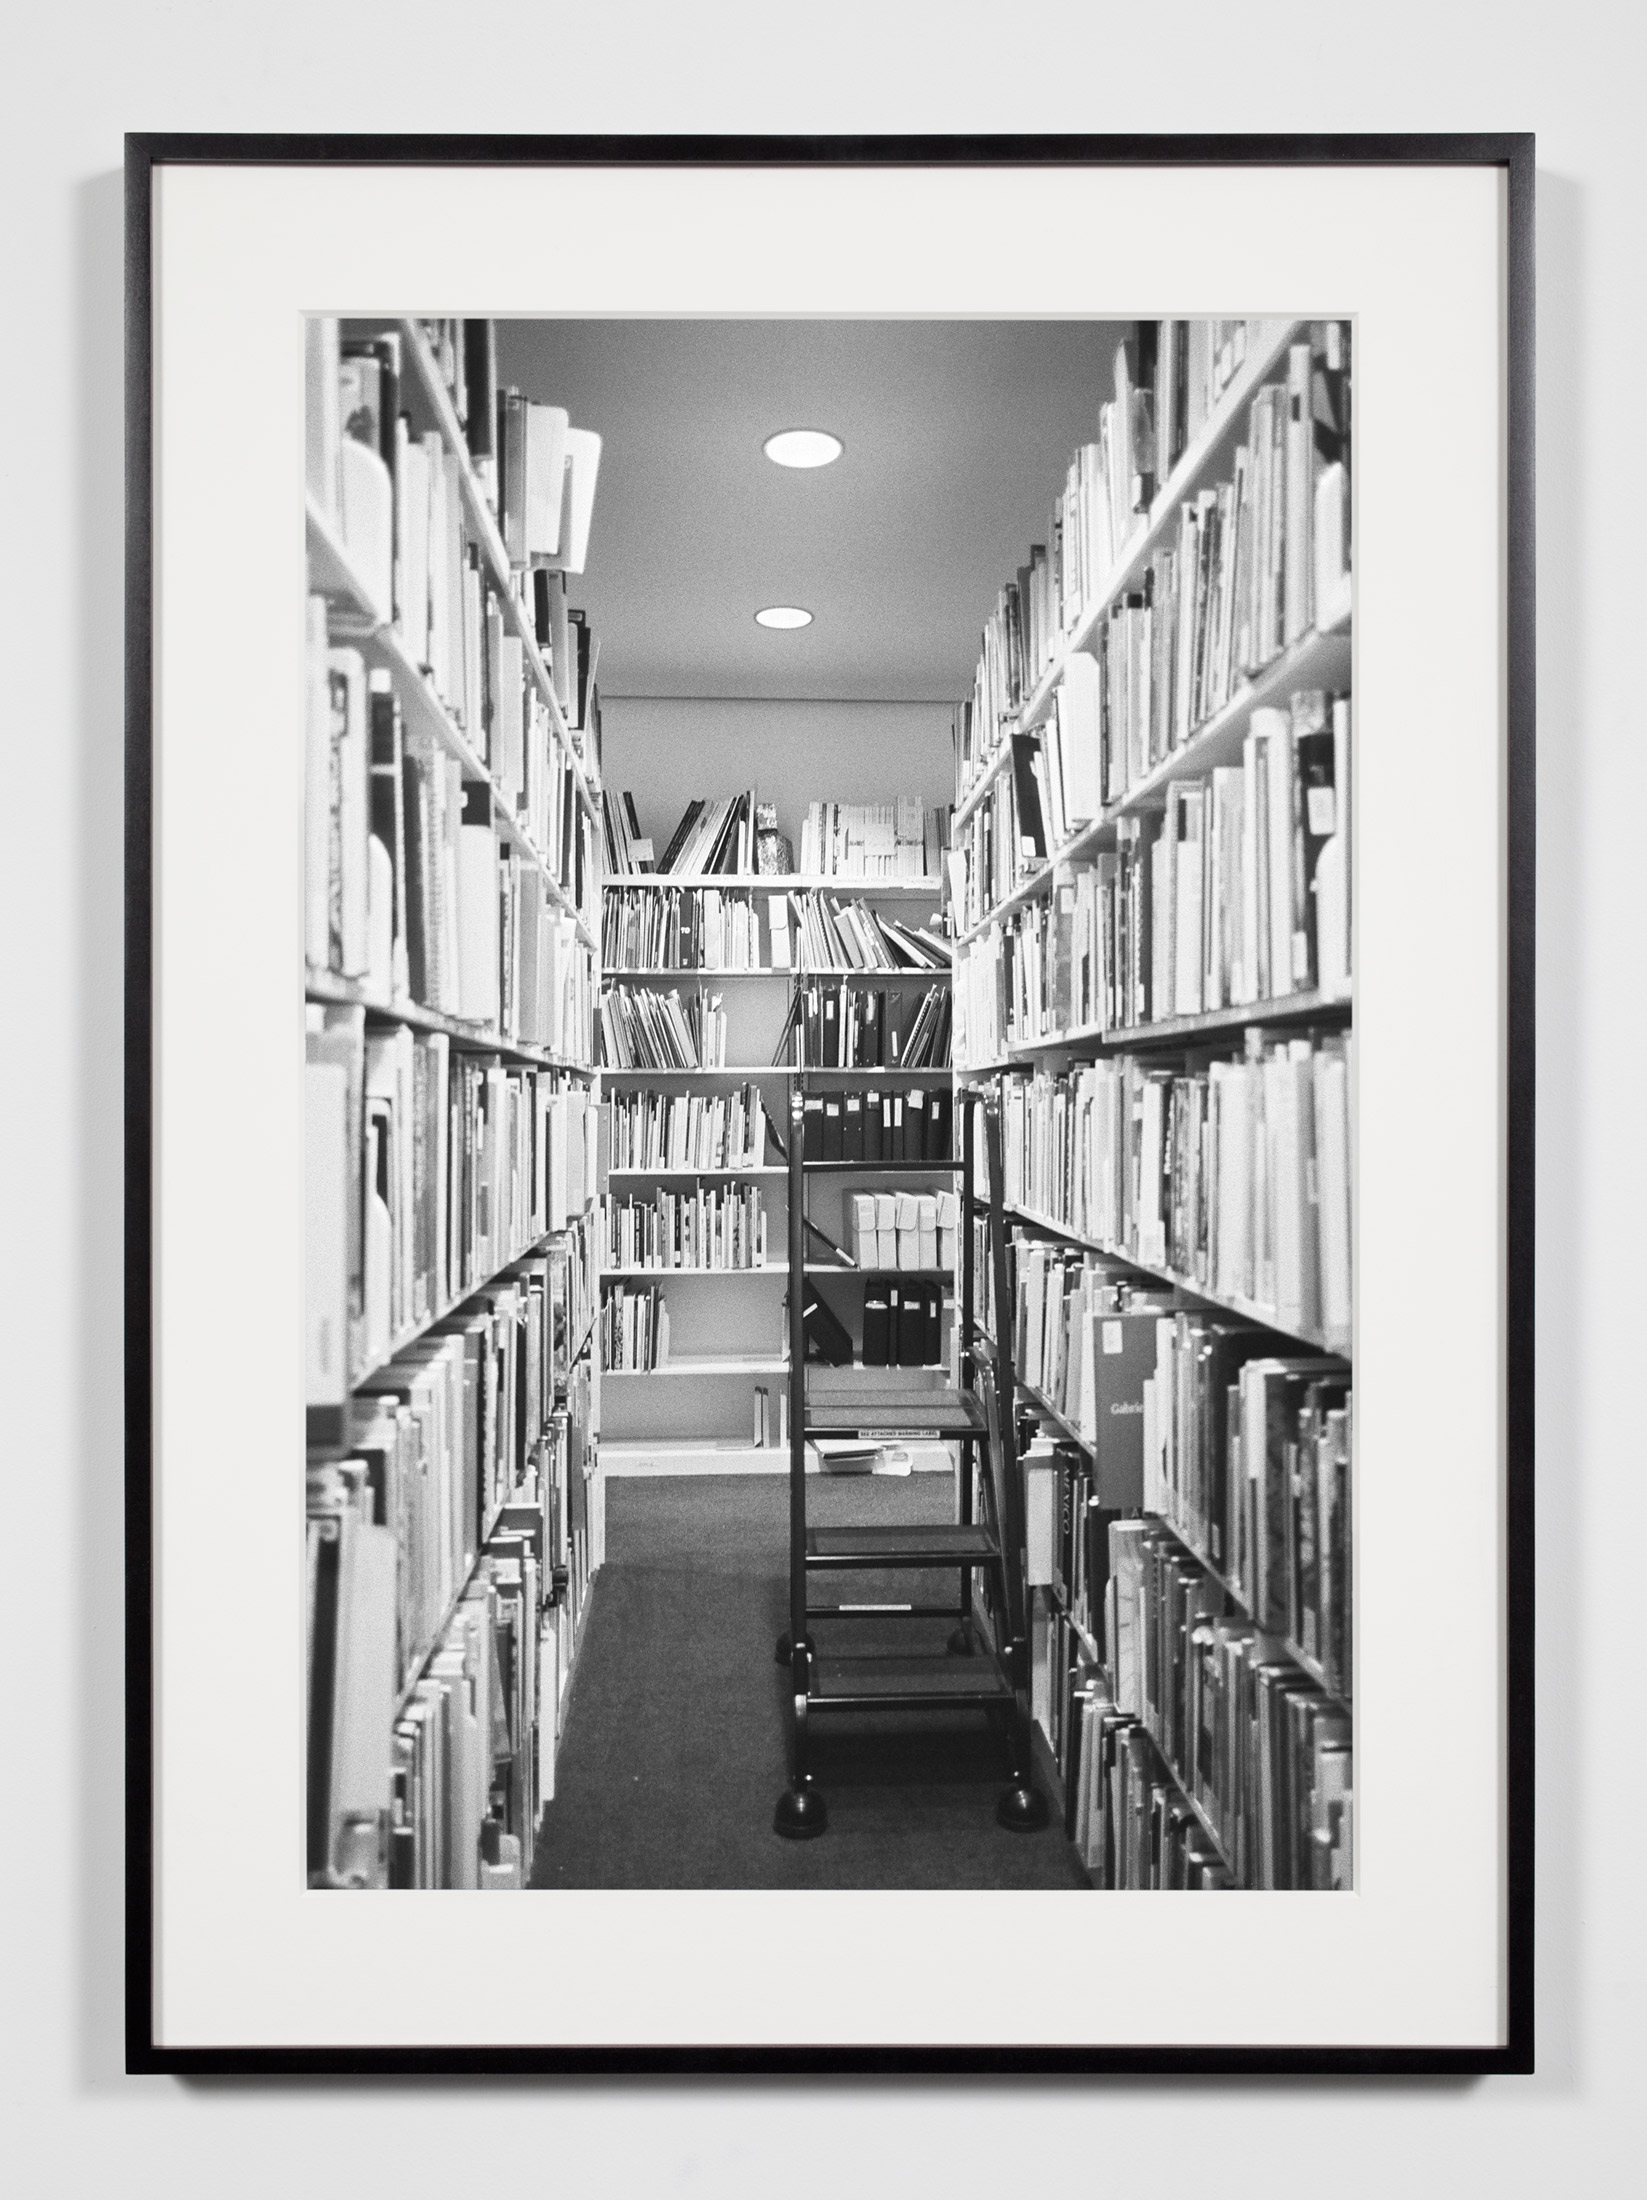   Museum Library Stacks, Washington, District of Columbia, August 18, 2008    2011   Epson Ultrachrome K3 archival ink jet print on Hahnemühle Photo Rag paper  36 3/8 x 26 3/8 inches   Industrial Portraits, 2008–     